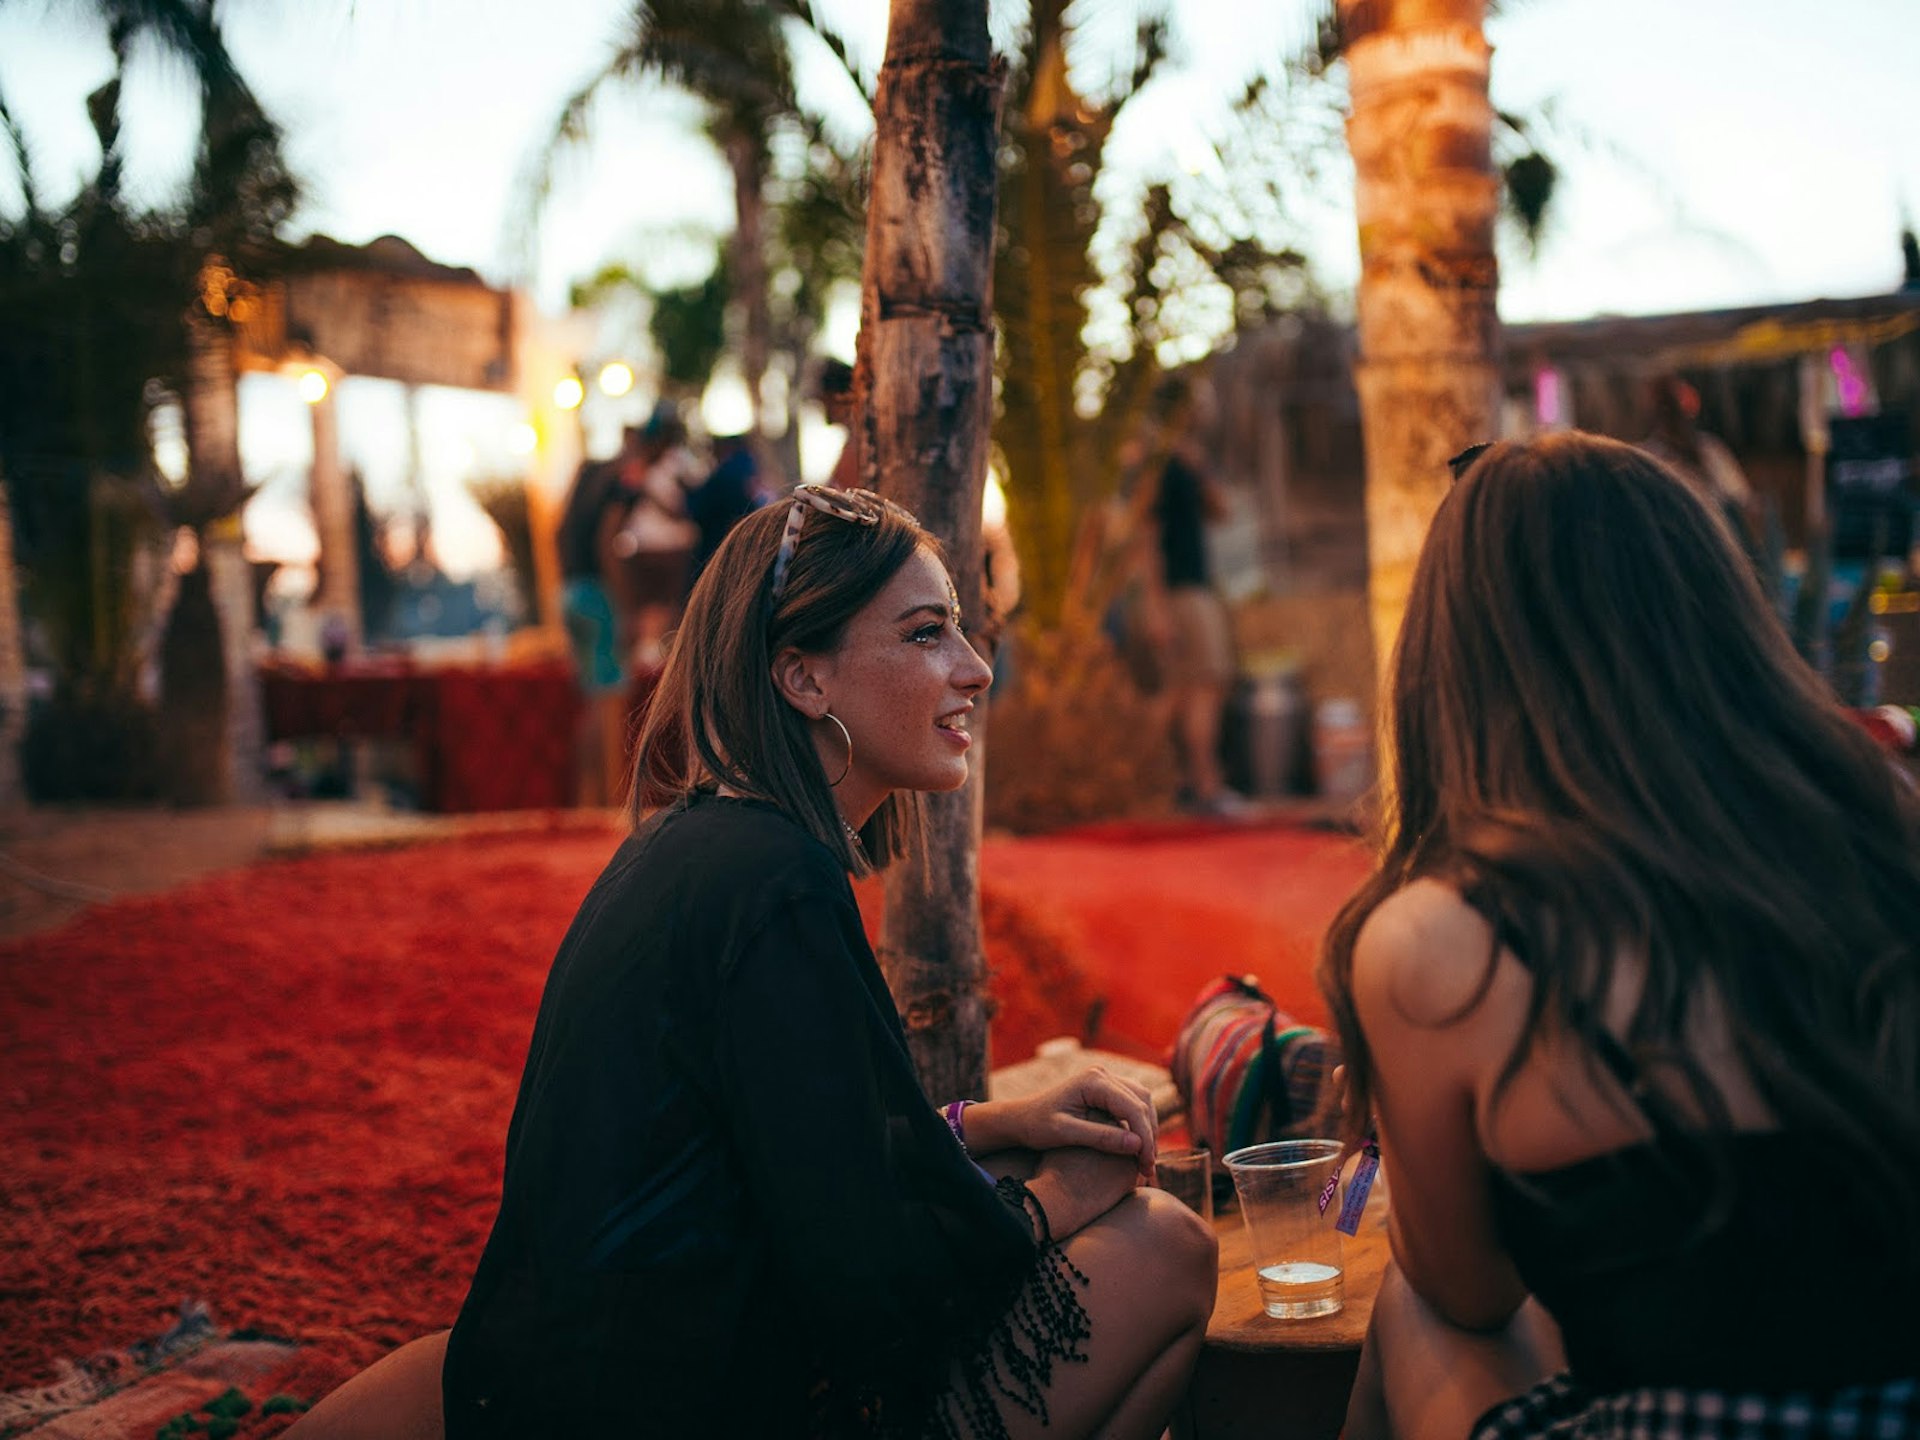 Alternative festivals - two women relaxing sharing drinks at the Oasis Festival, Morocco at dusk. The floor appears to be made of red sand and there are palm trees and twinkling lights in the background.